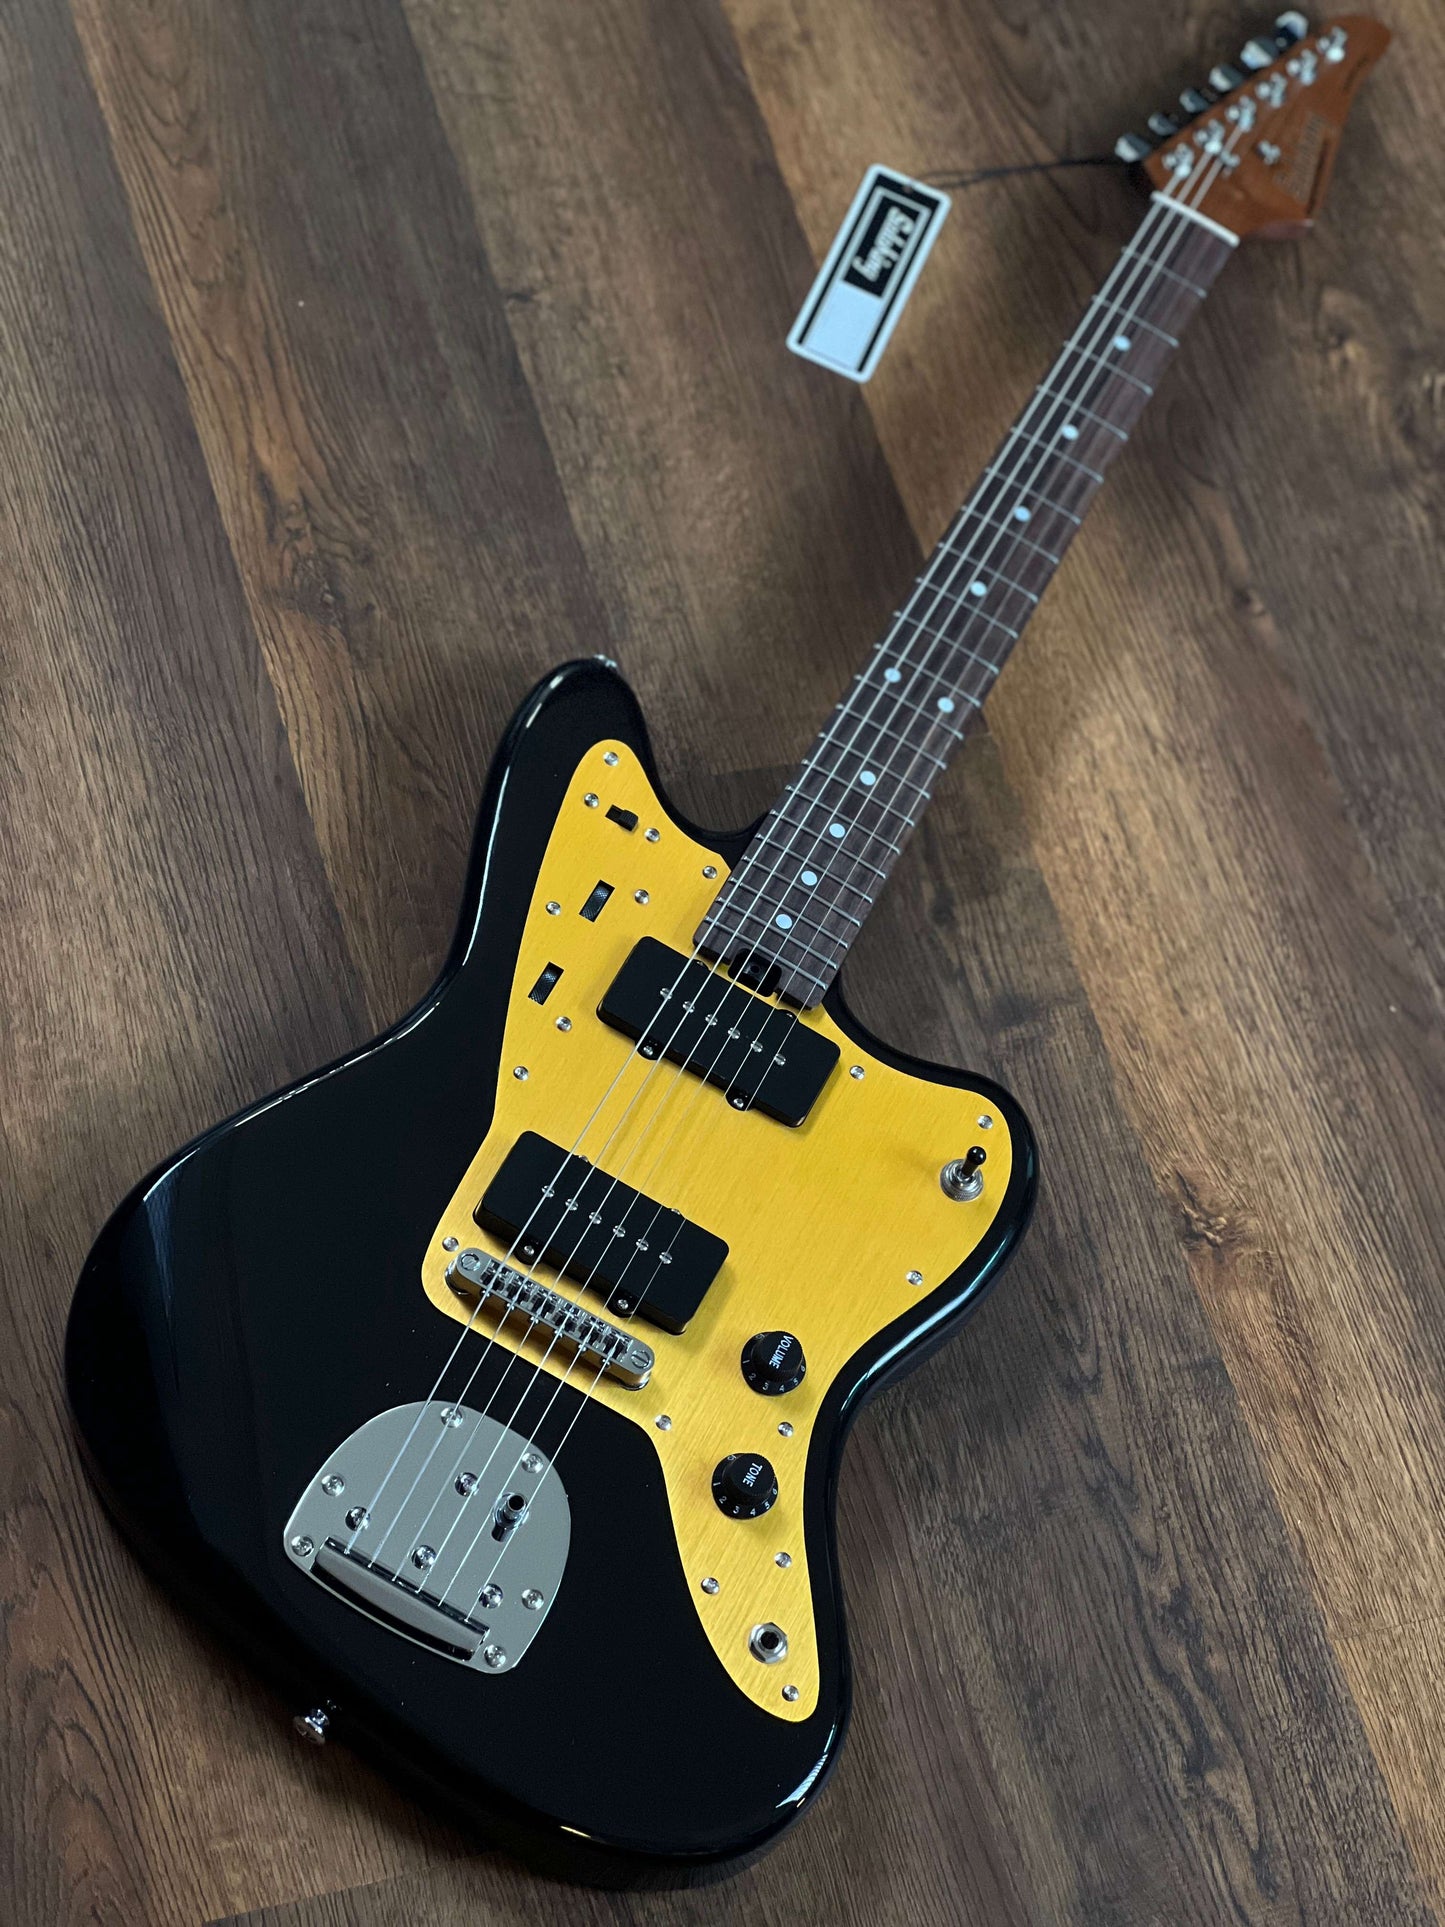 Soloking JM40 Offset Classic in Black